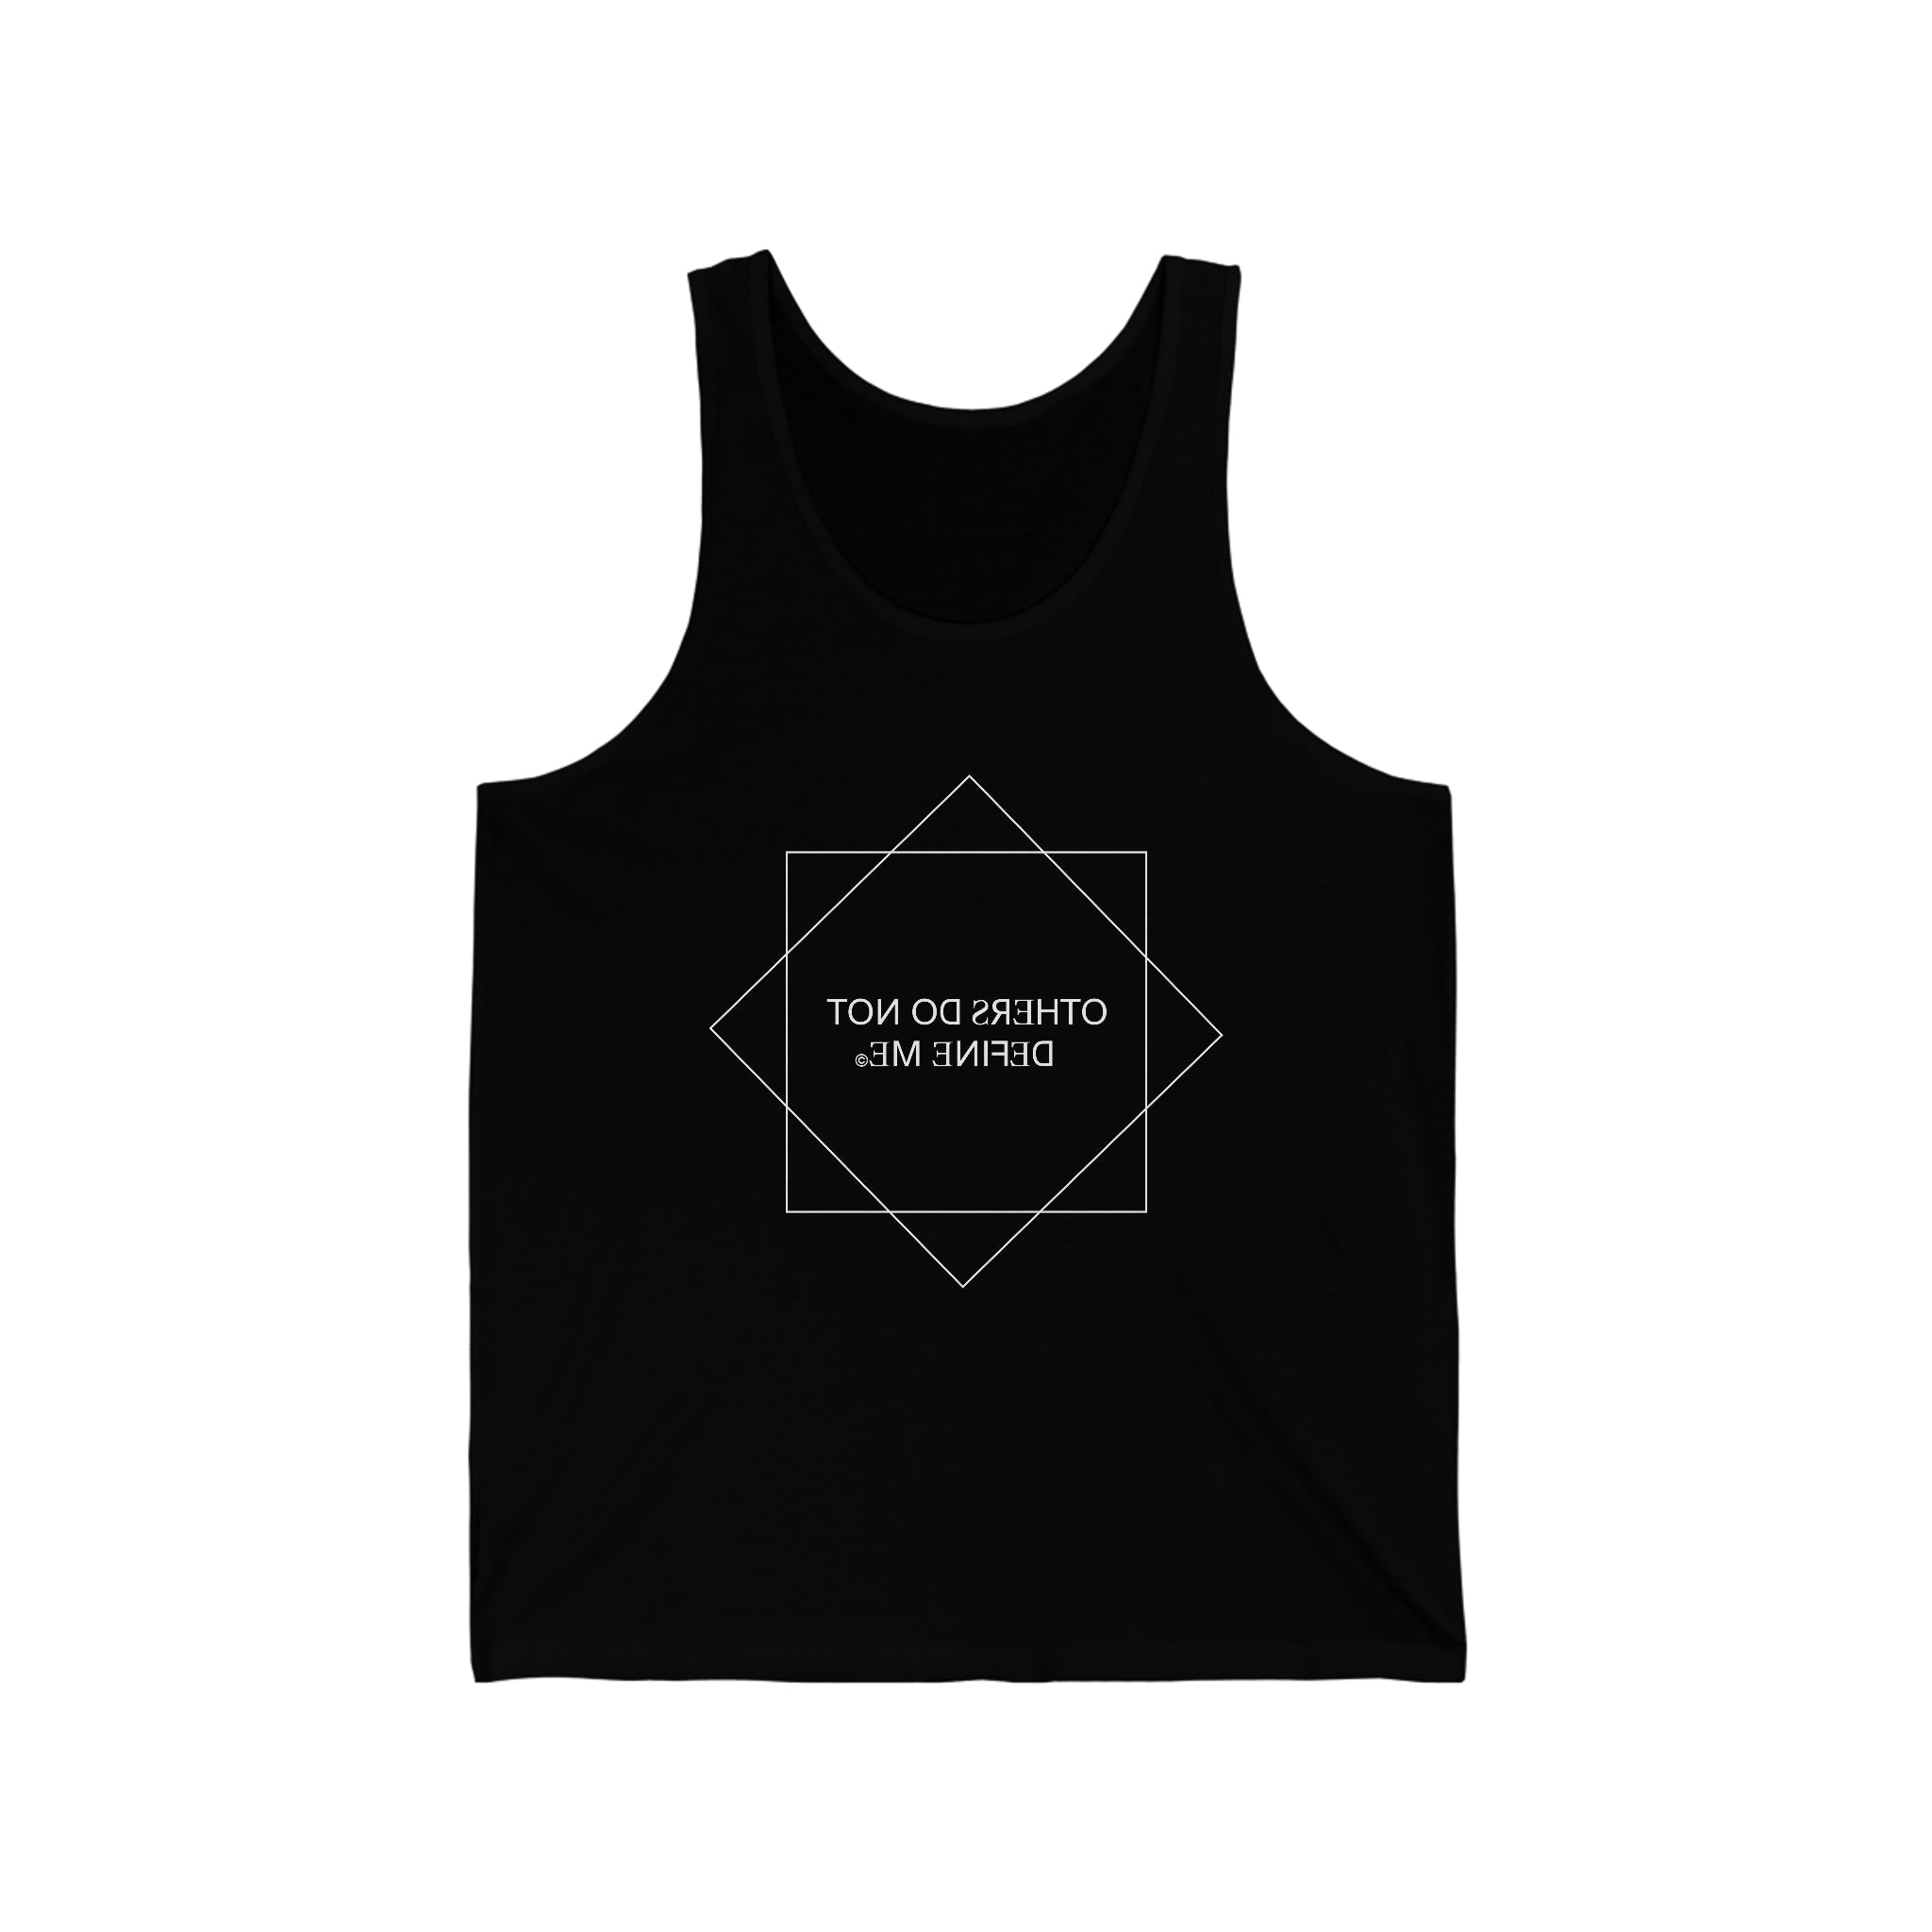 "Others Do Not Define Me" Men's Tank